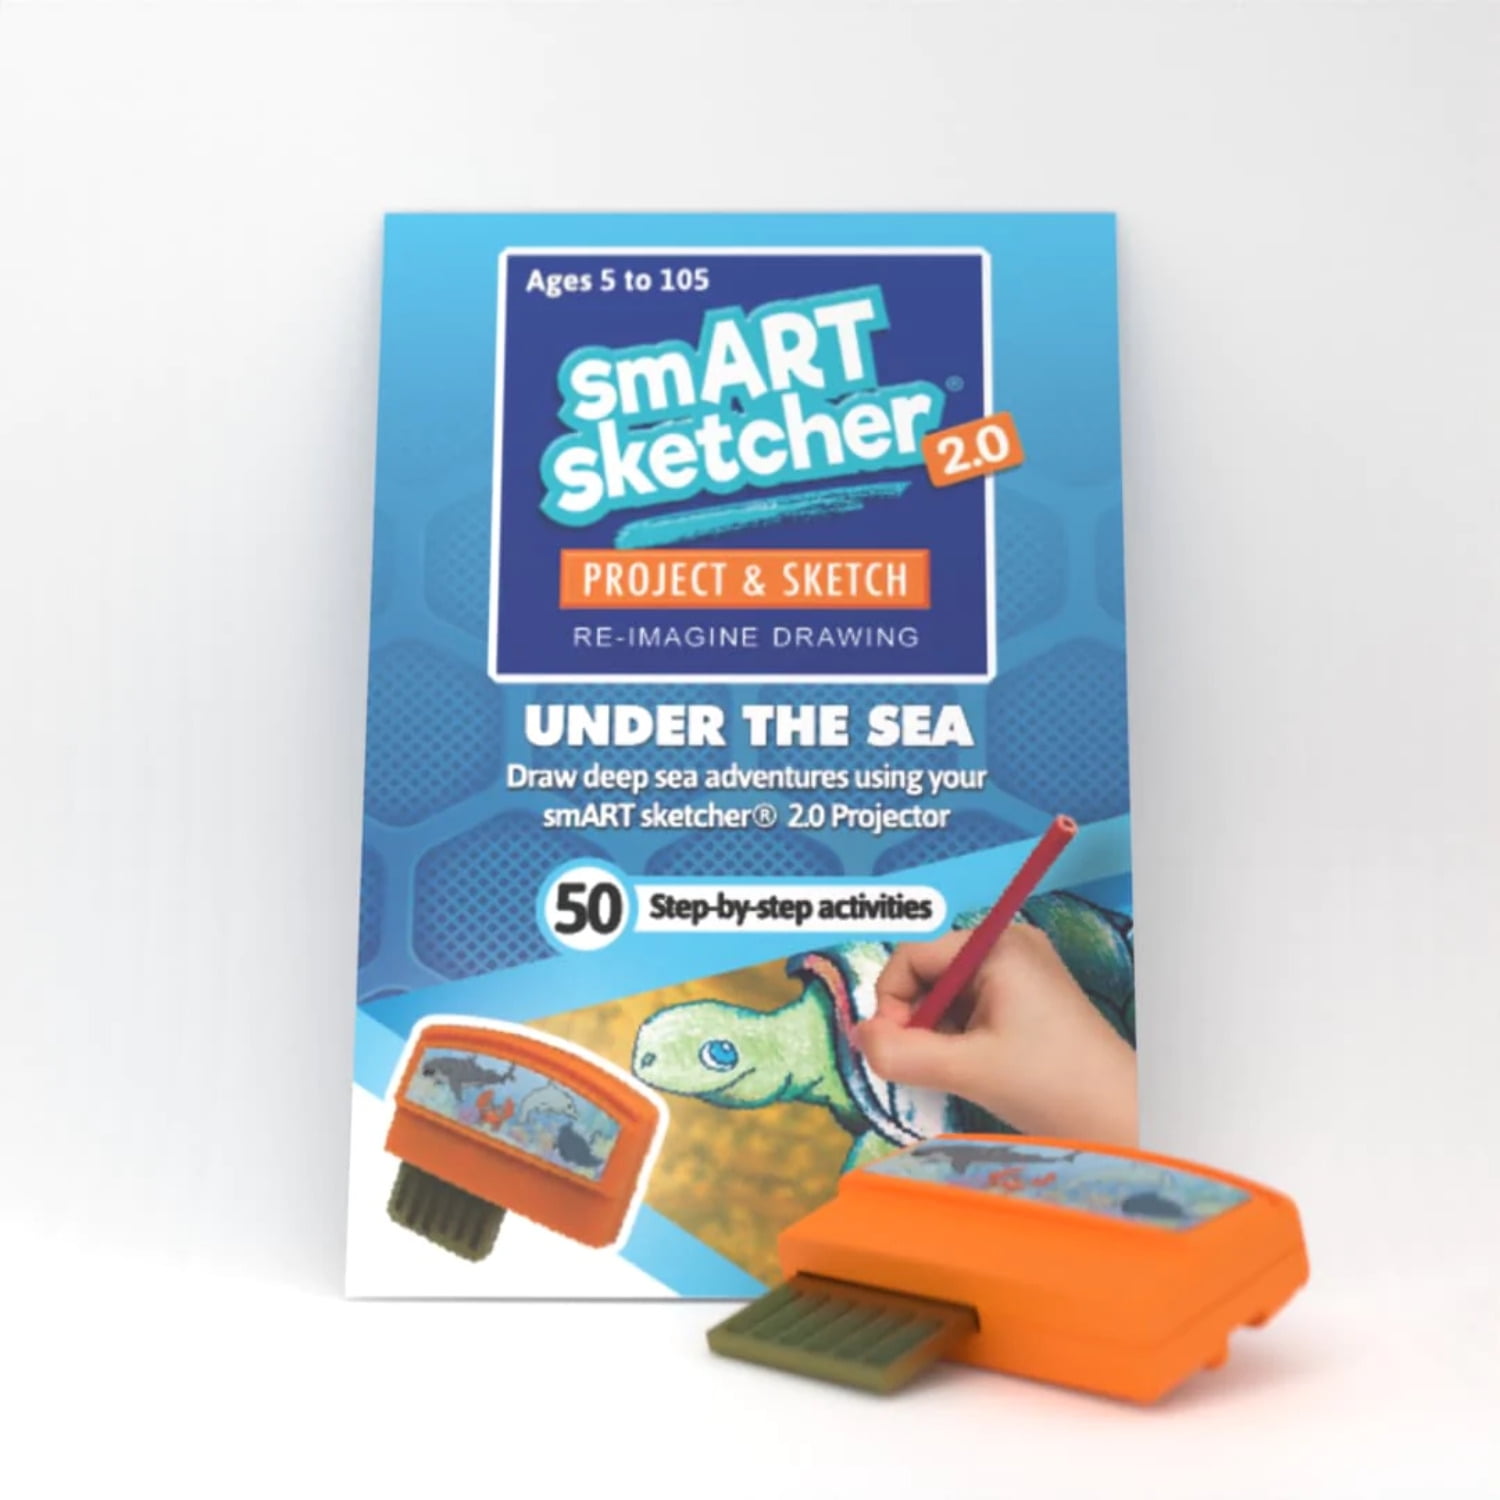 Here is a fun family activity: use the smART sketcher® to create fun n